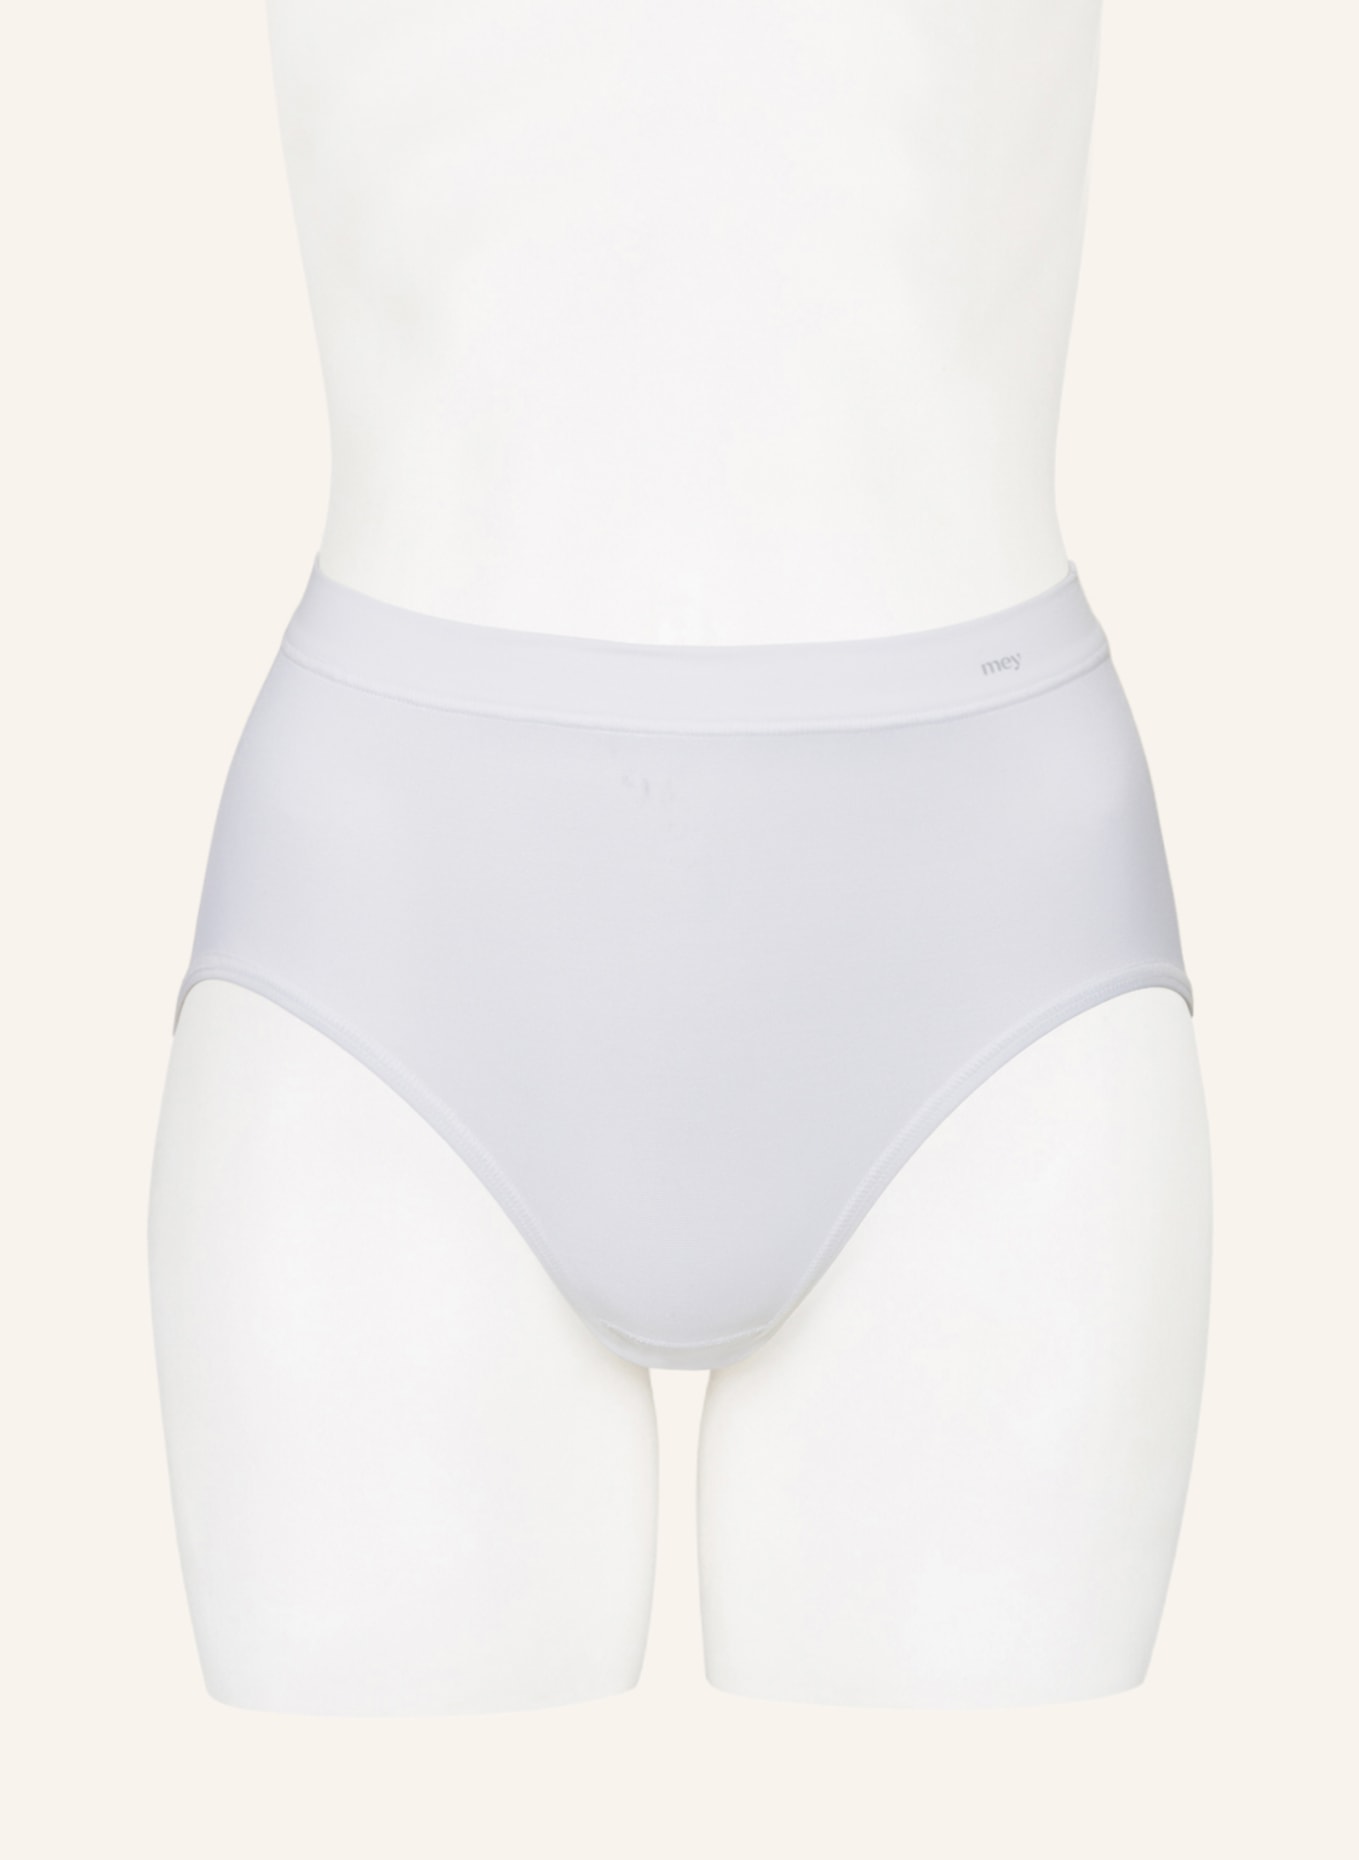 mey High-waisted brief series EMOTION, Color: WHITE (Image 2)